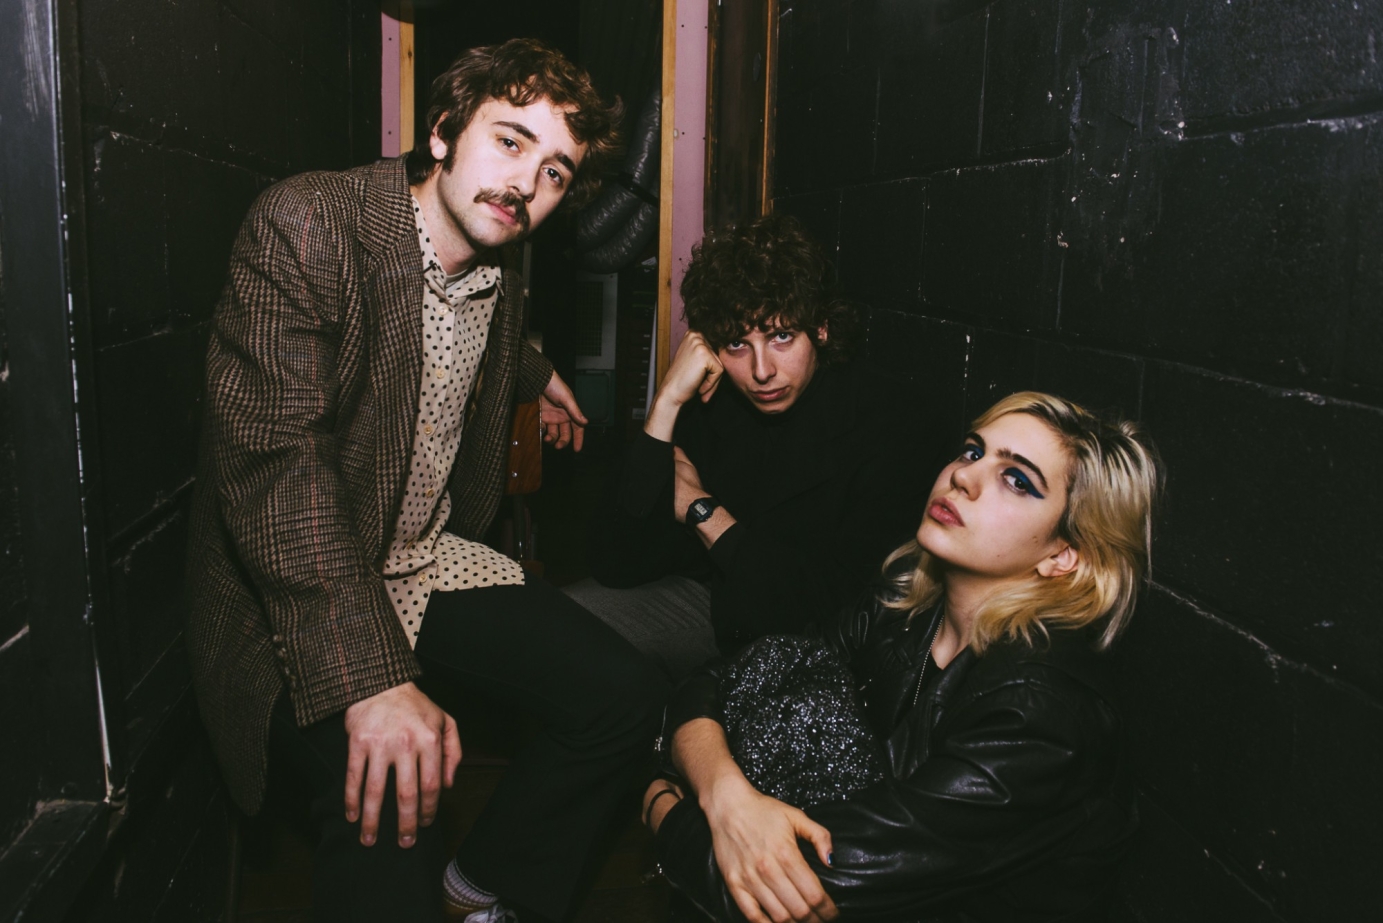 Photography for Sunflower Bean by Andy Sawyer